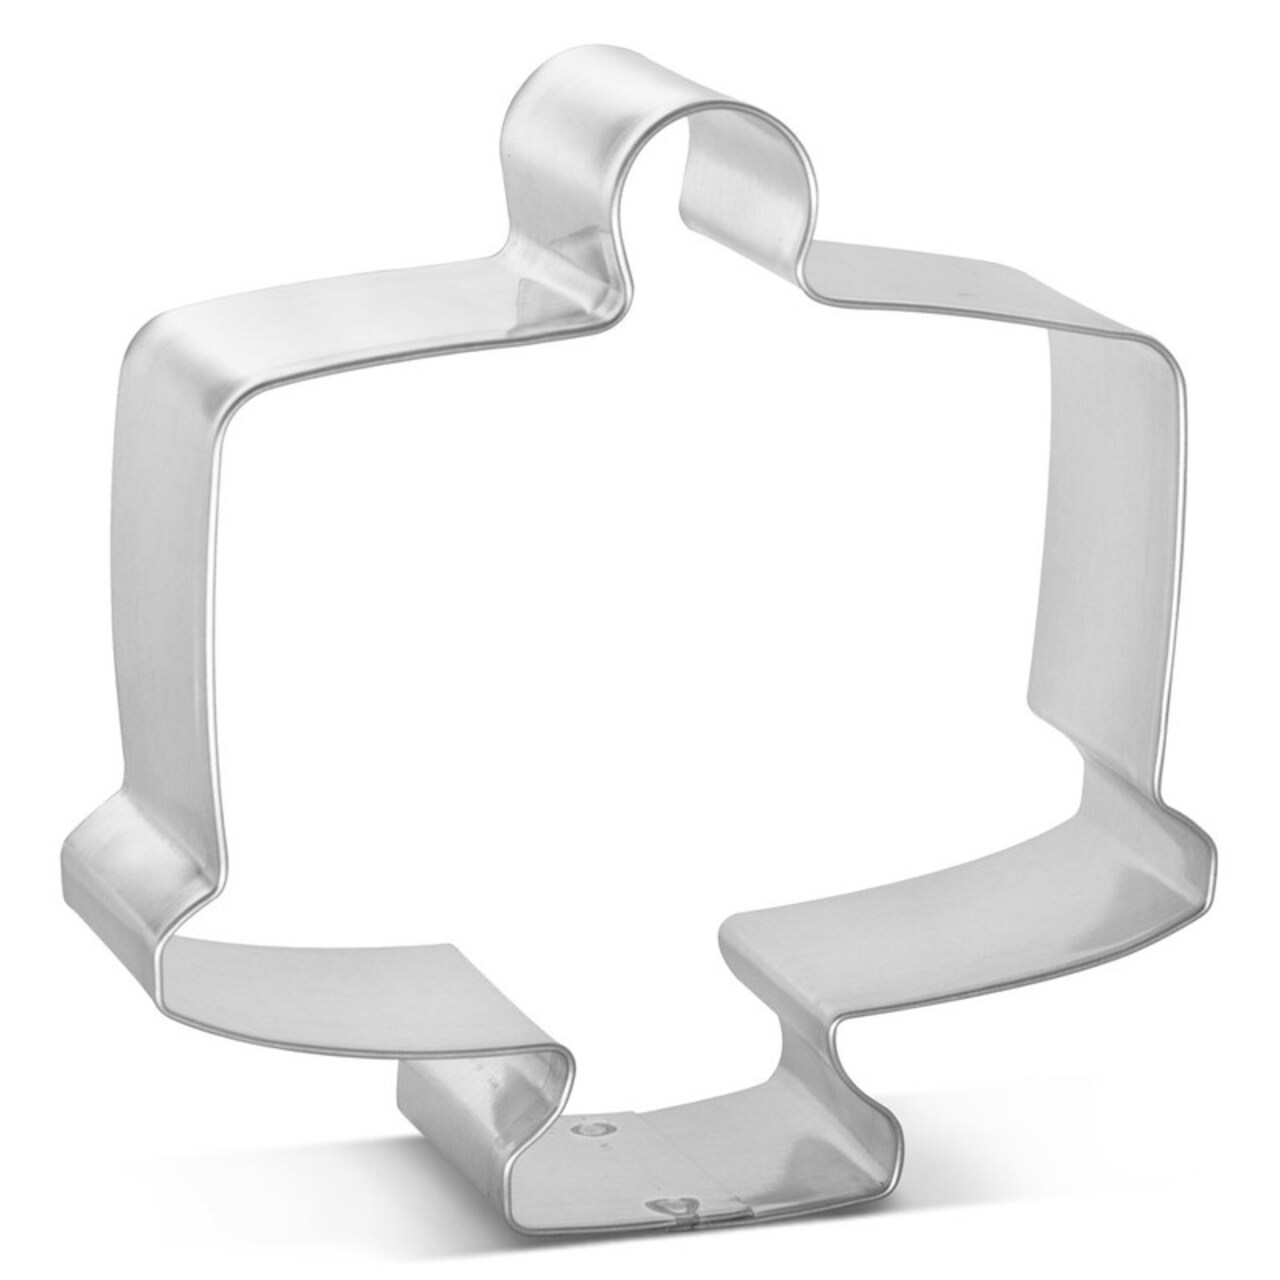 Cake Stand Cookie Cutter 3.5 in, CookieCutter.com, Tin Plated Steel, Handmade in the USA